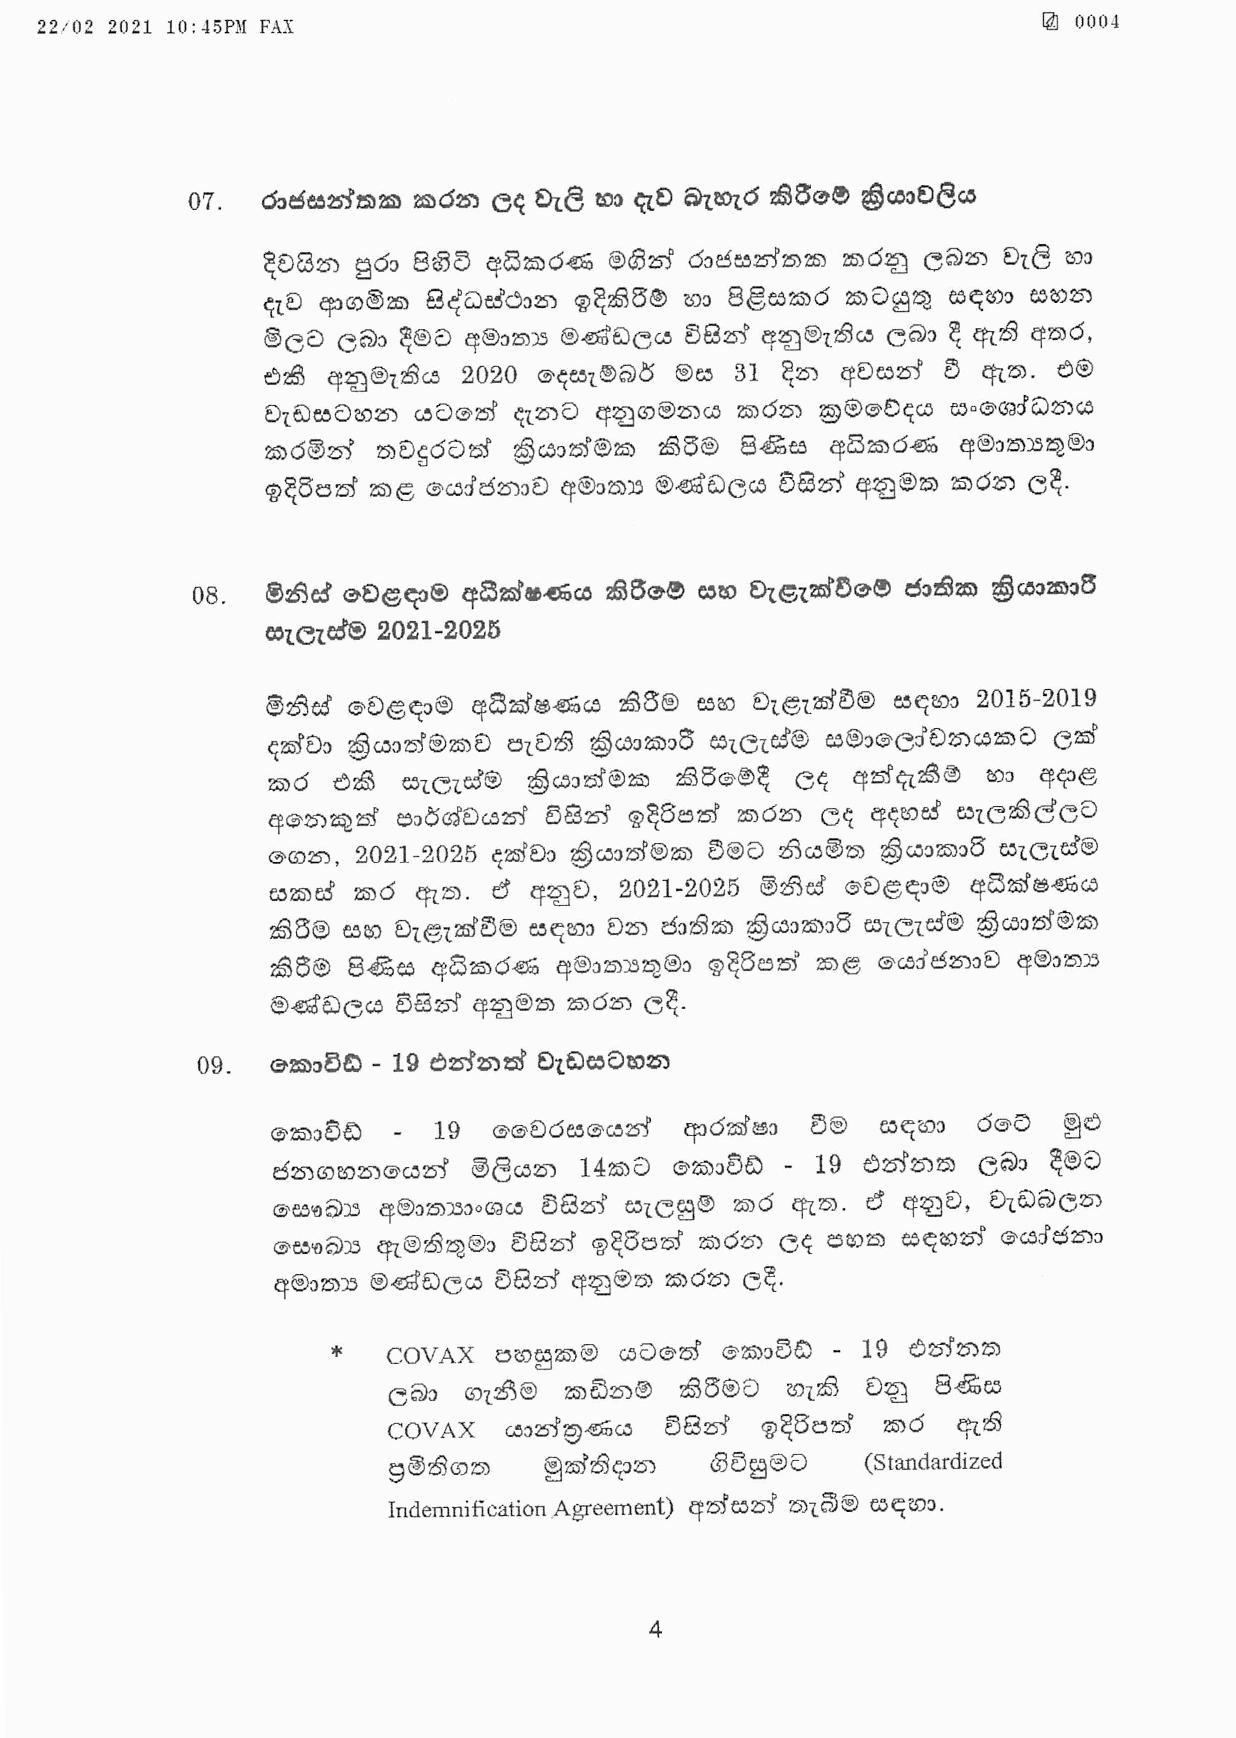 Cabinet Decision on 22.02.2021 page 004